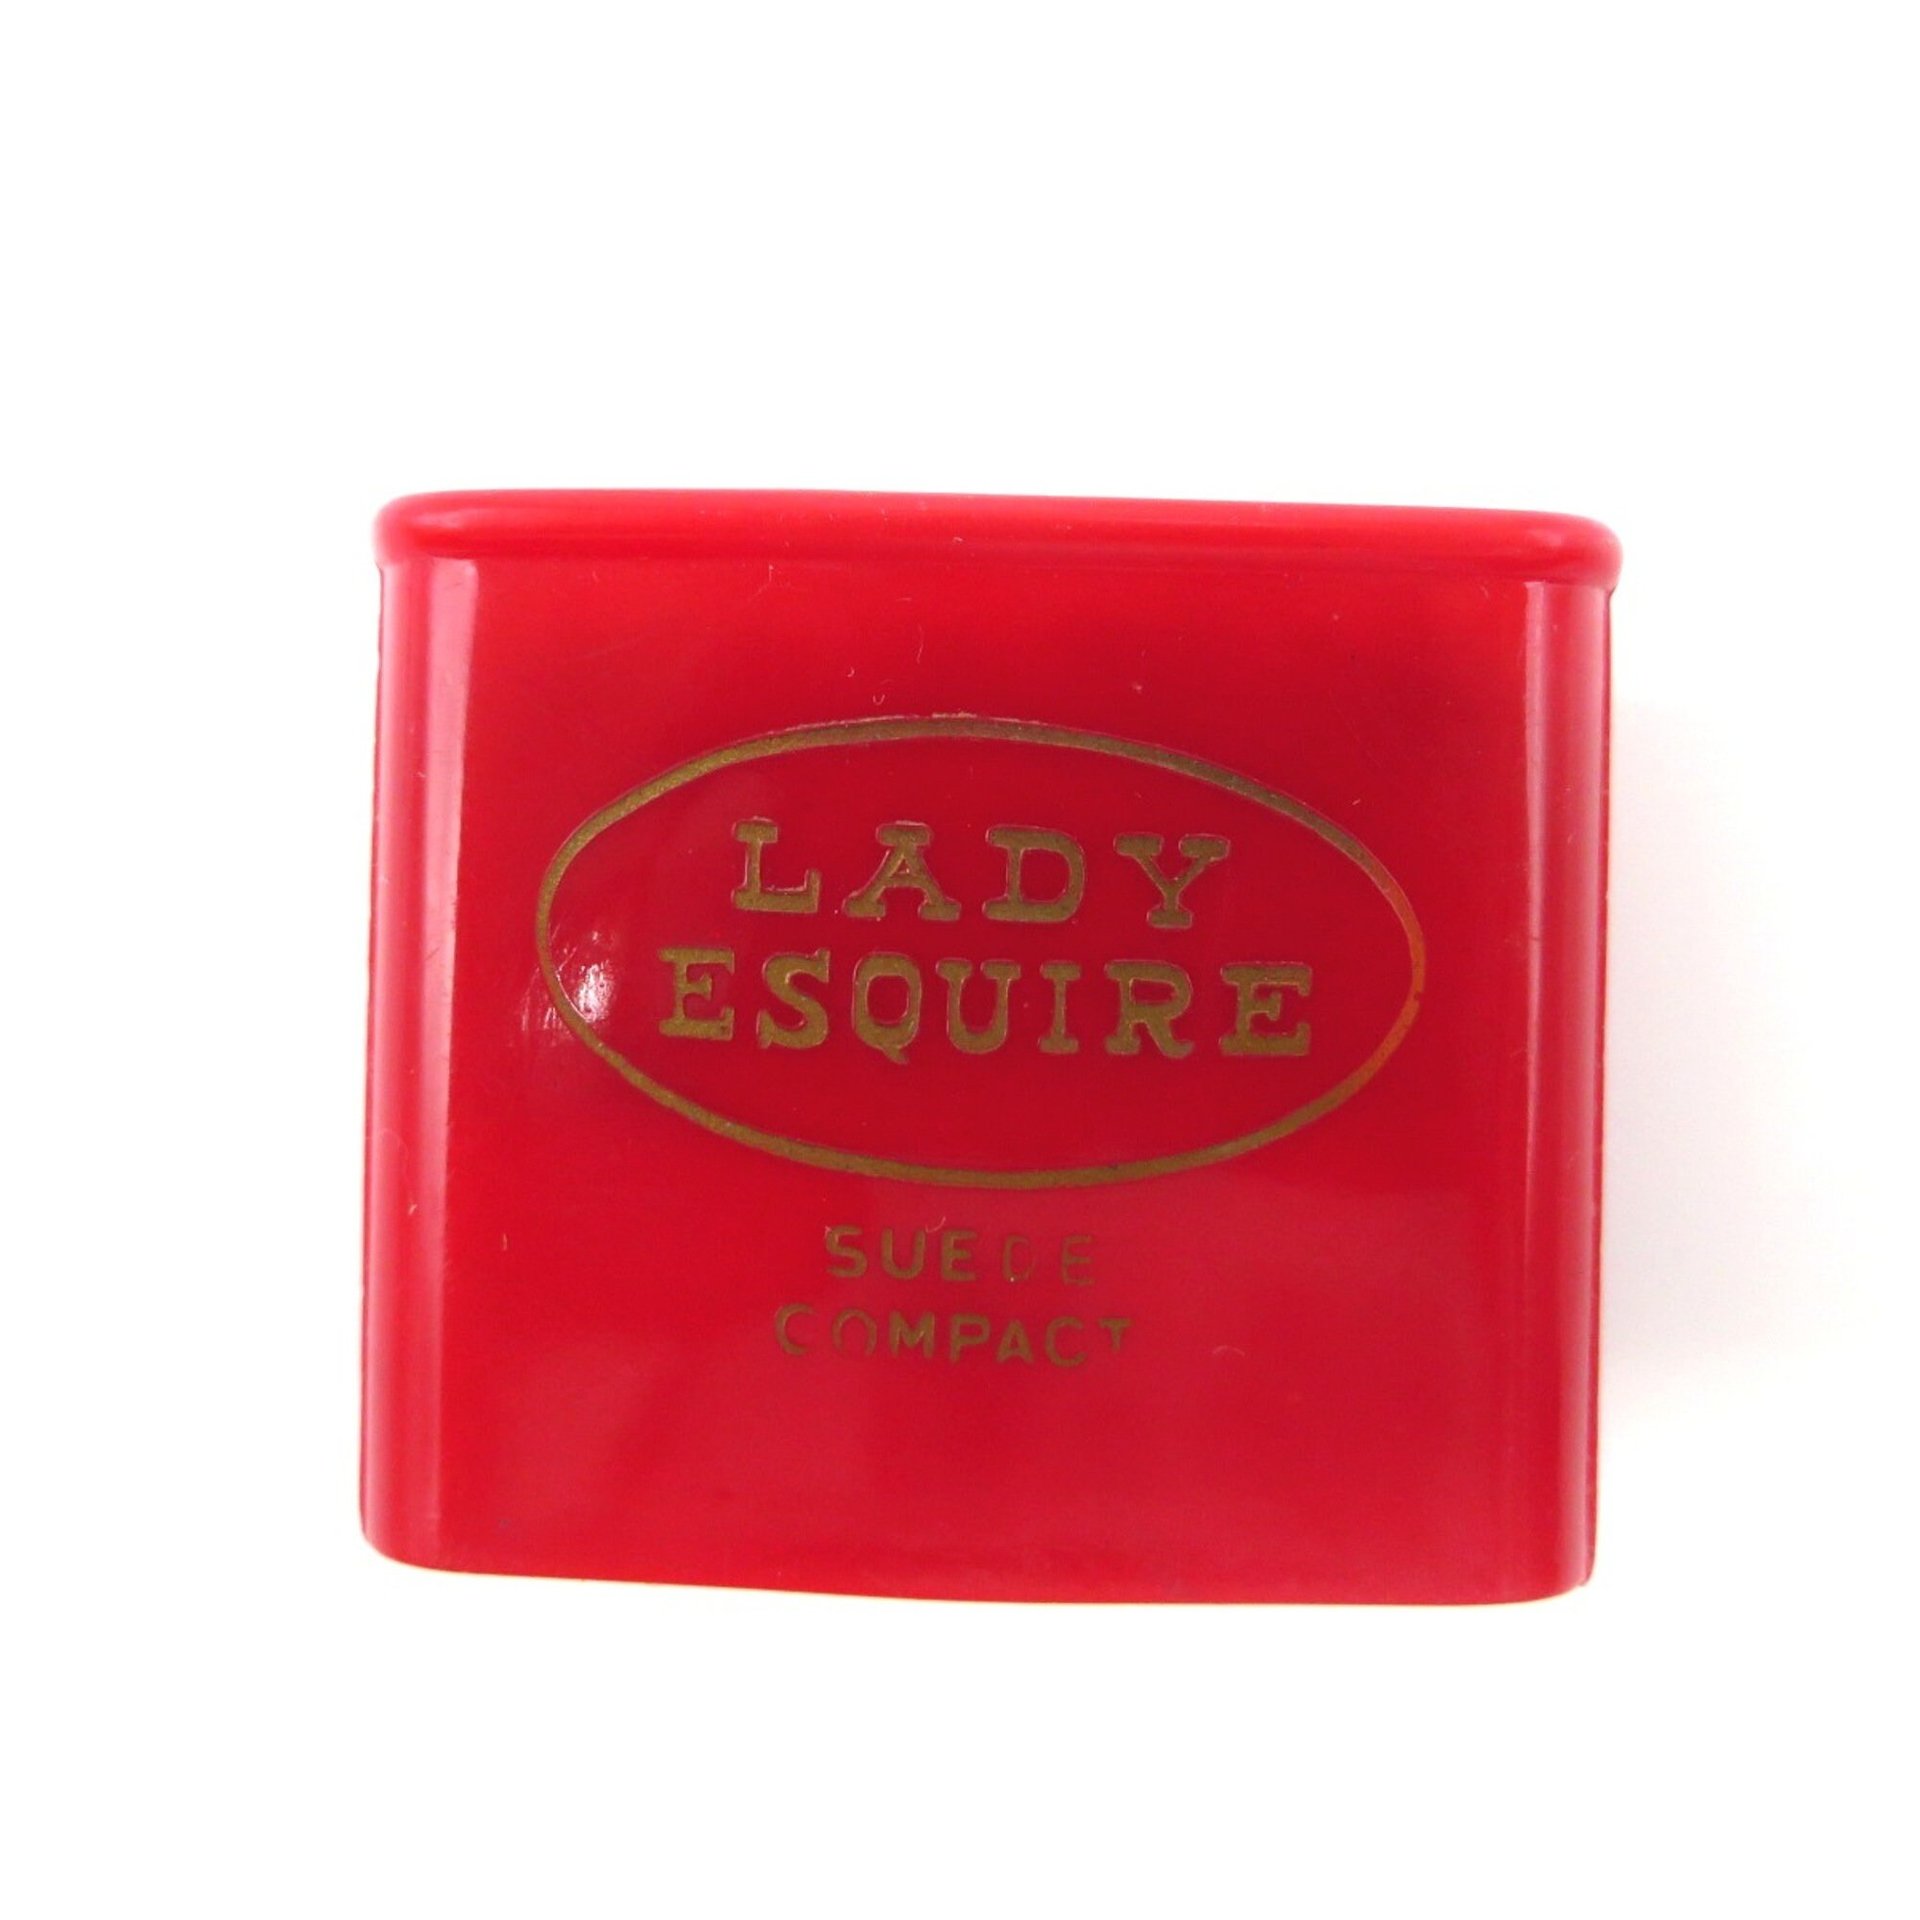 LADY ESQUIRE Compact, Red Plastic Case with Retractable Suede Brush